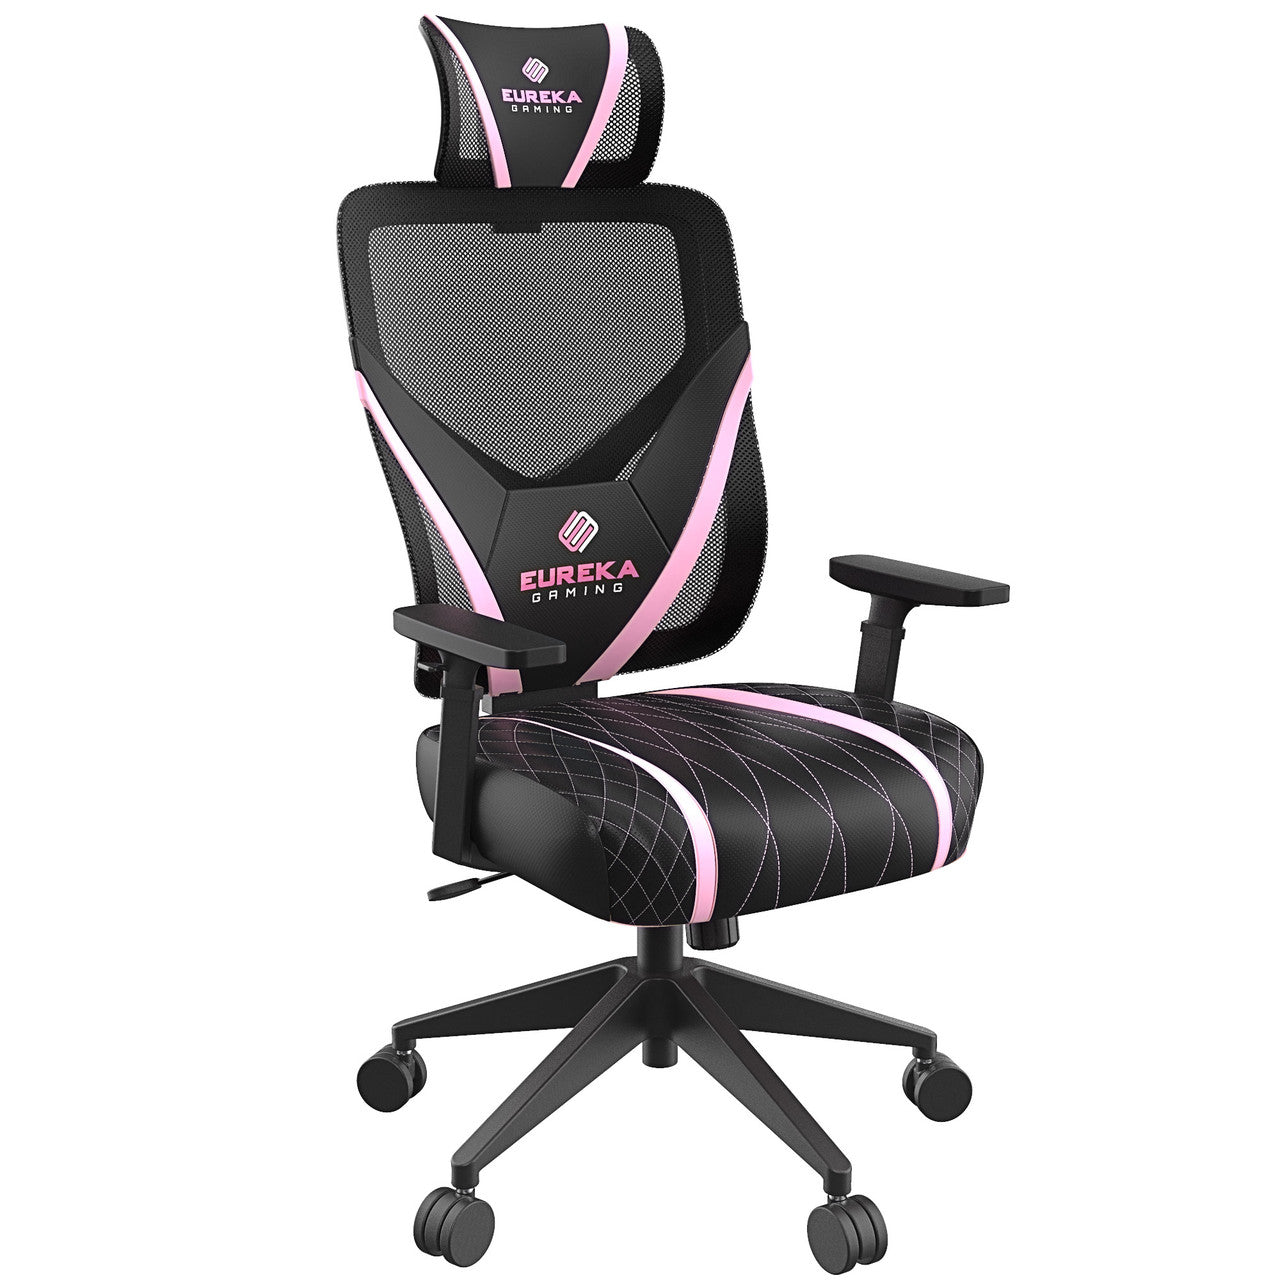 Eureka Ergonomic Home Office Gaming Computer Swivel Chair with Headrest and Lumbar Support, Adjustable Mesh Back & Height, Exclusive Ergonomic Video Game Chair, Black&Pink